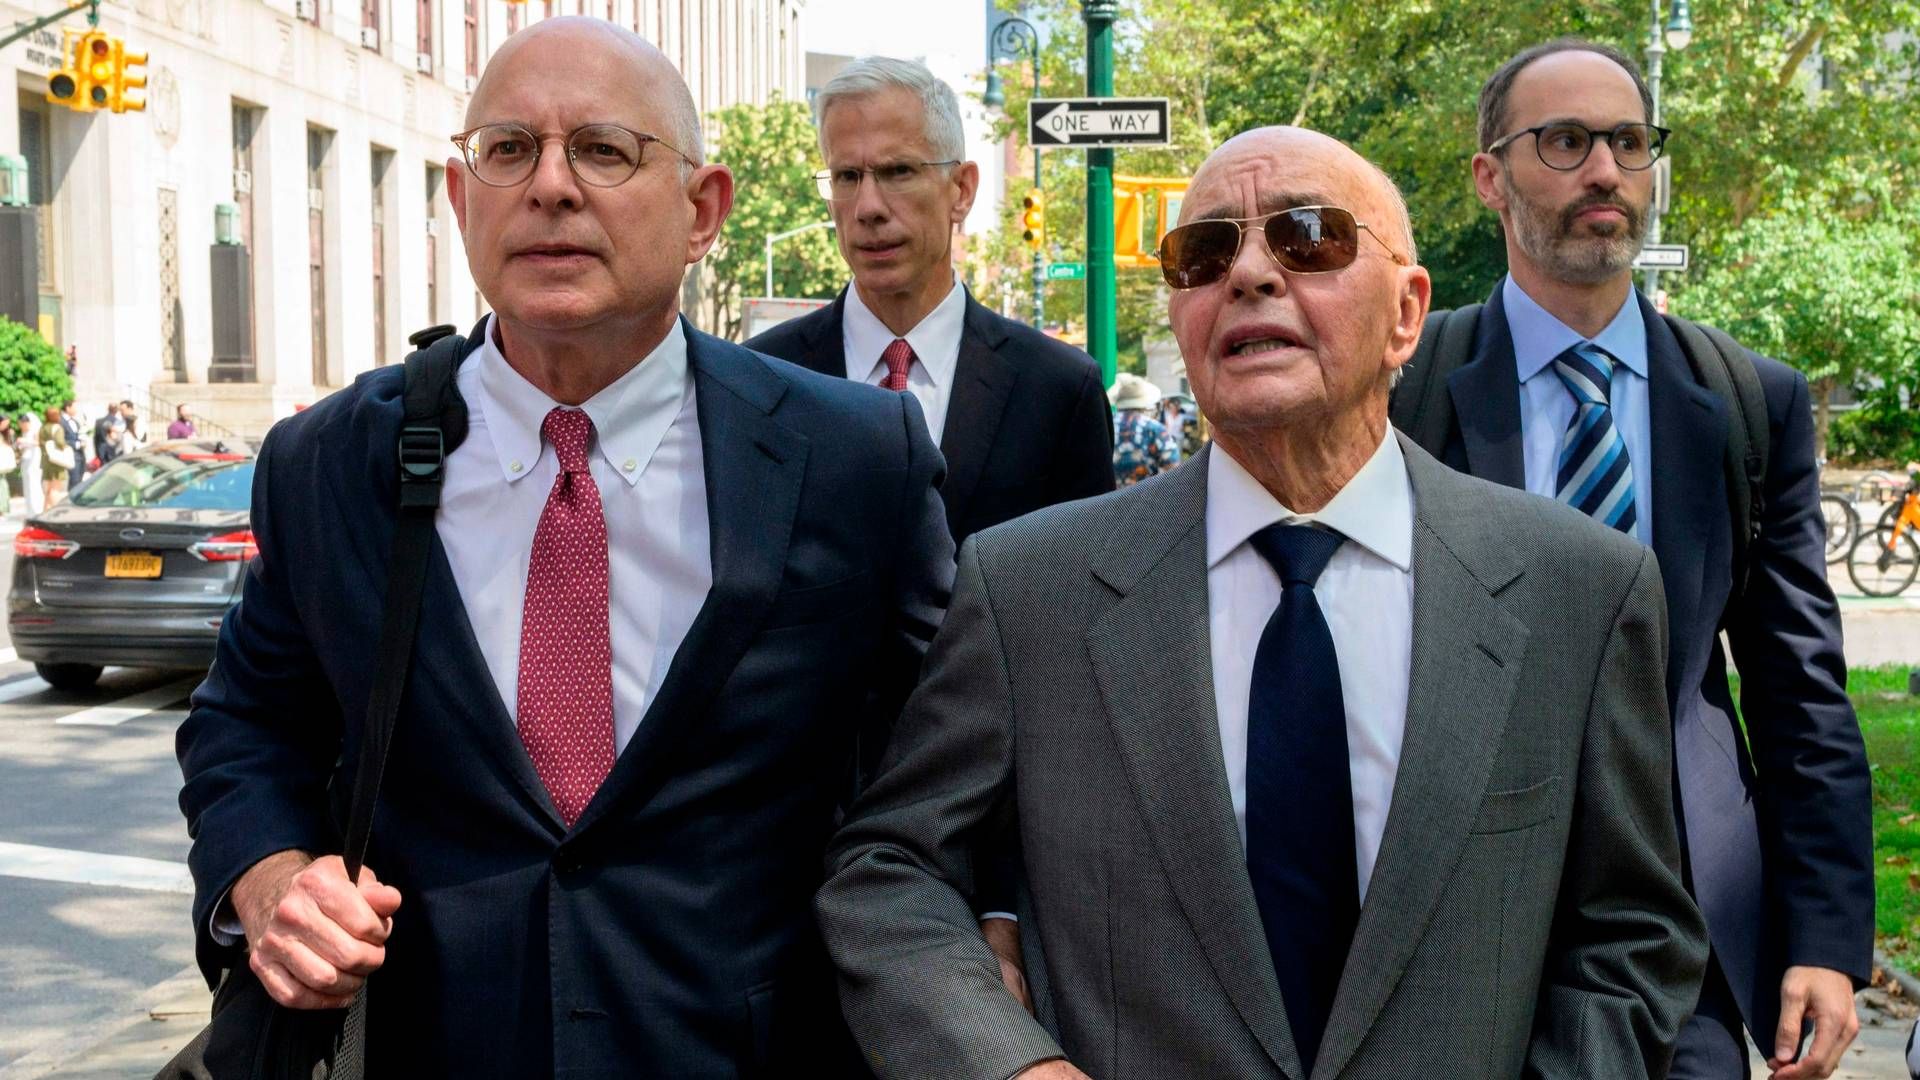 Joe Lewis (right) pleads not guilty to insider trading charges. | Photo: Angela Weiss